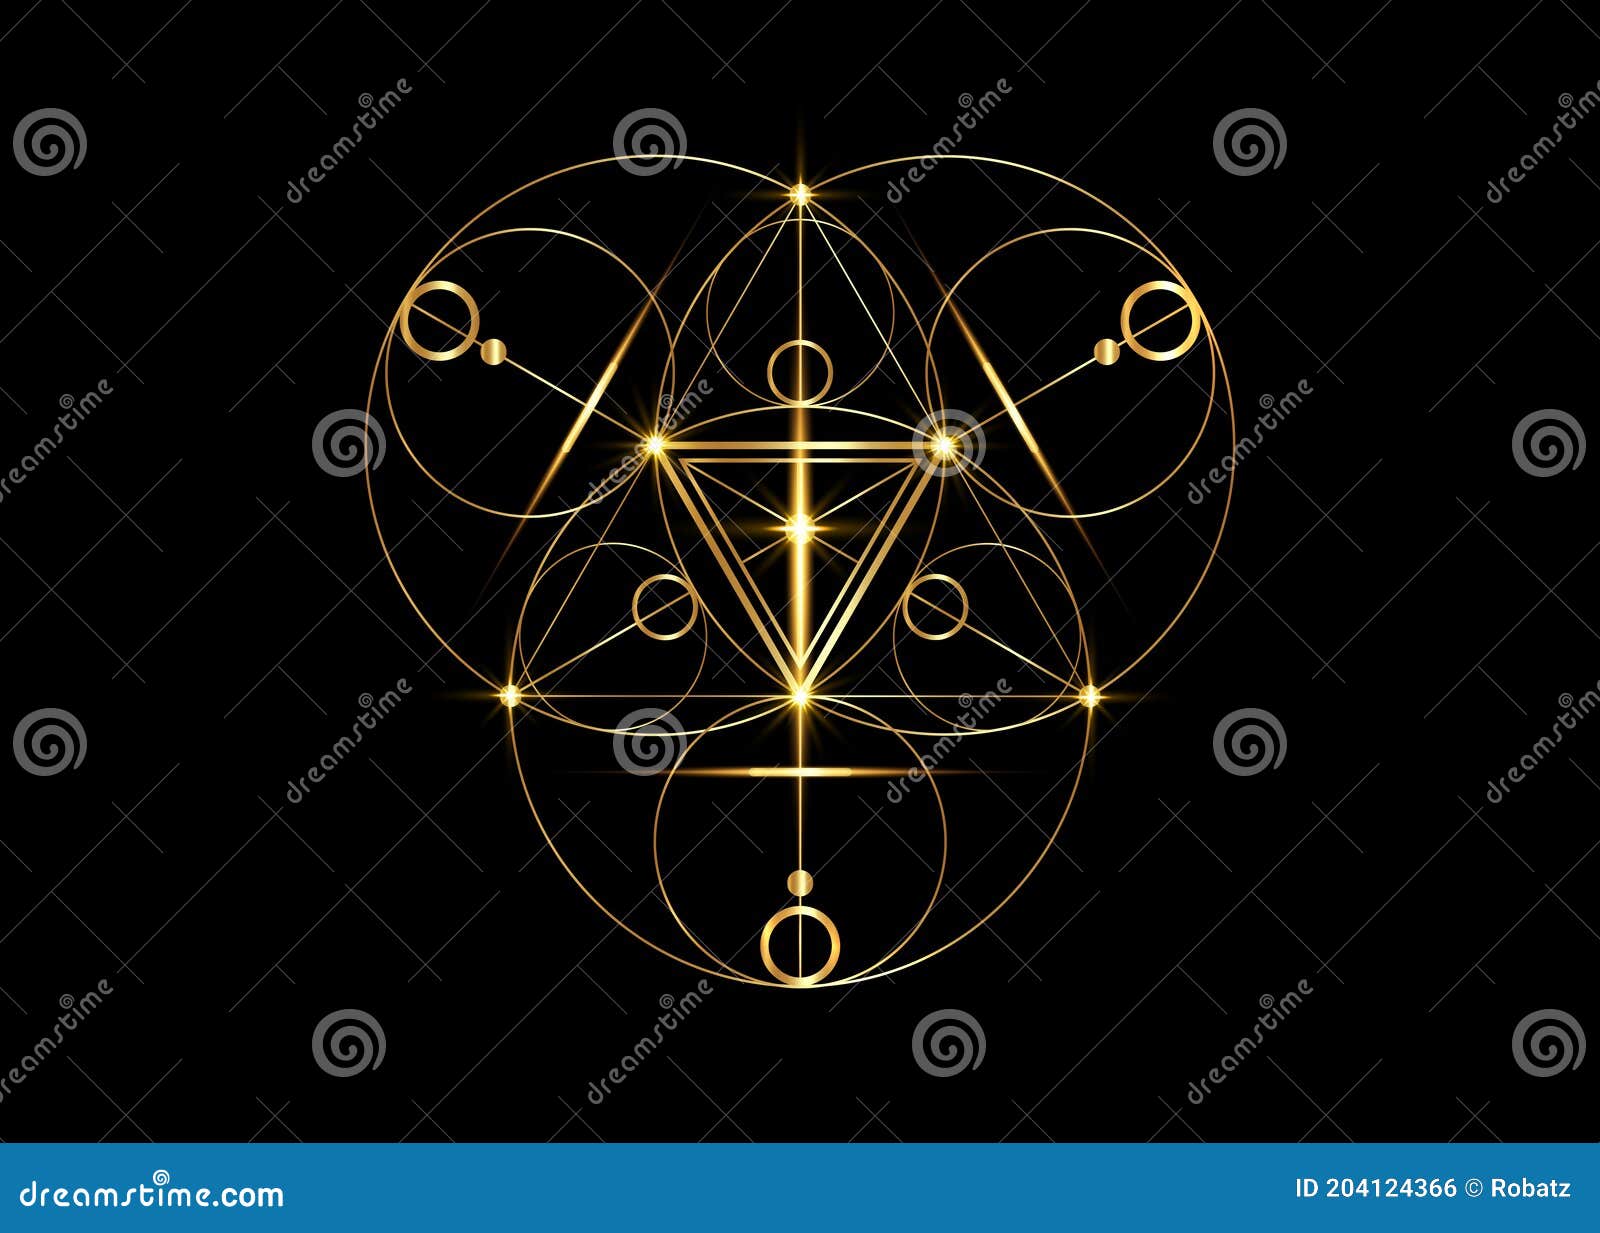 magic alchemy s, sacred geometry. mandala religion, philosophy, spirituality, occultism concept. golden triangle with lines